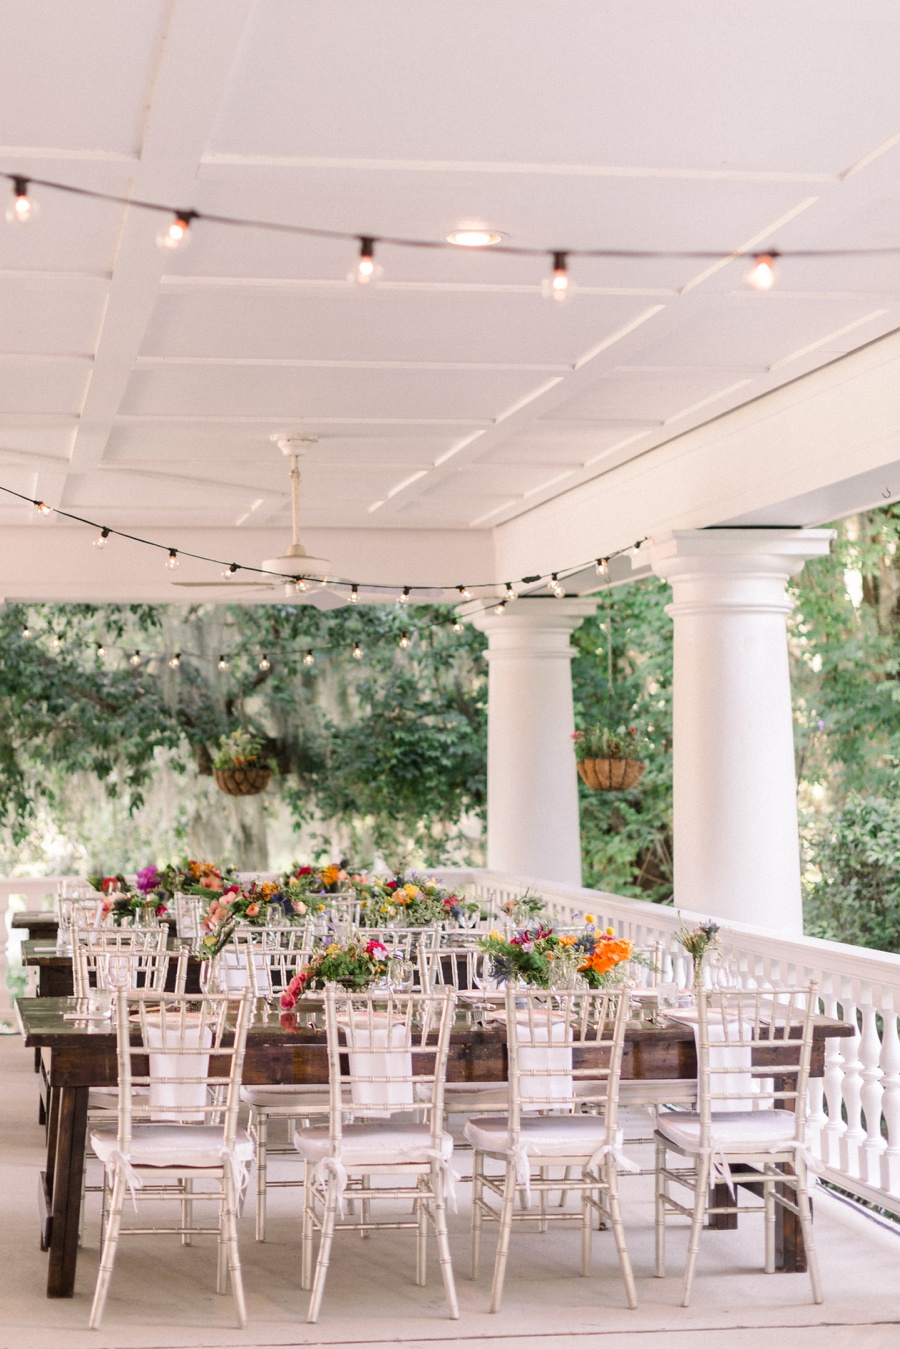 Colorful Charleston Wedding Reception with Wood tables